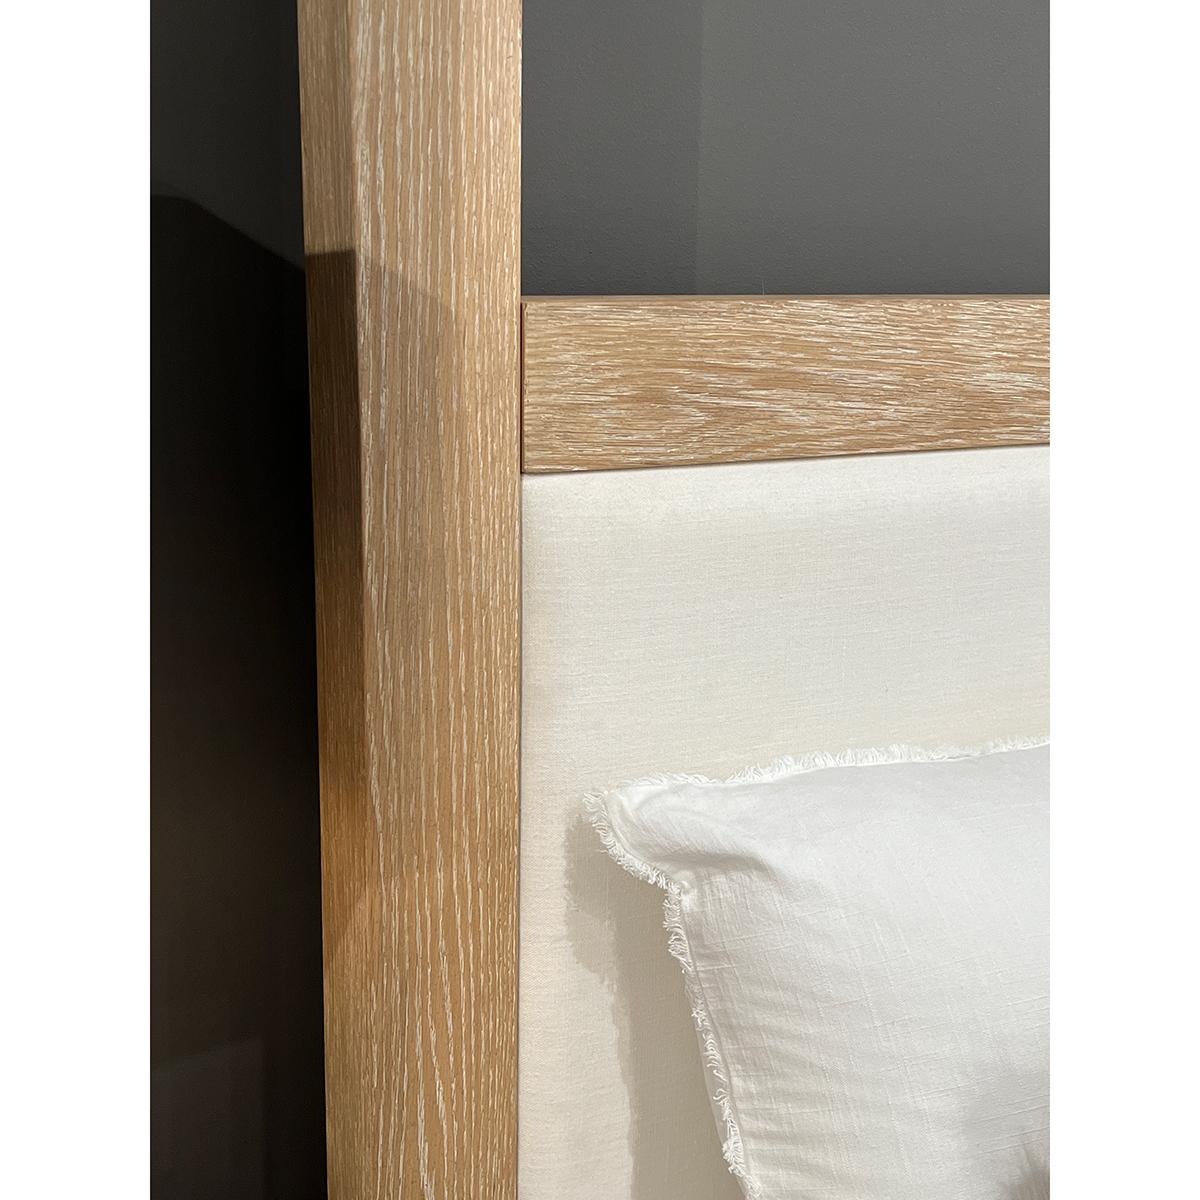 

A Modern Light Oak Canopy Bed with a wonderful whitewashed natural oak finish. 

With polished brass accents and a bold frame, the simple cubist form captures the essence of minimalism.

US King Dimensions: 84